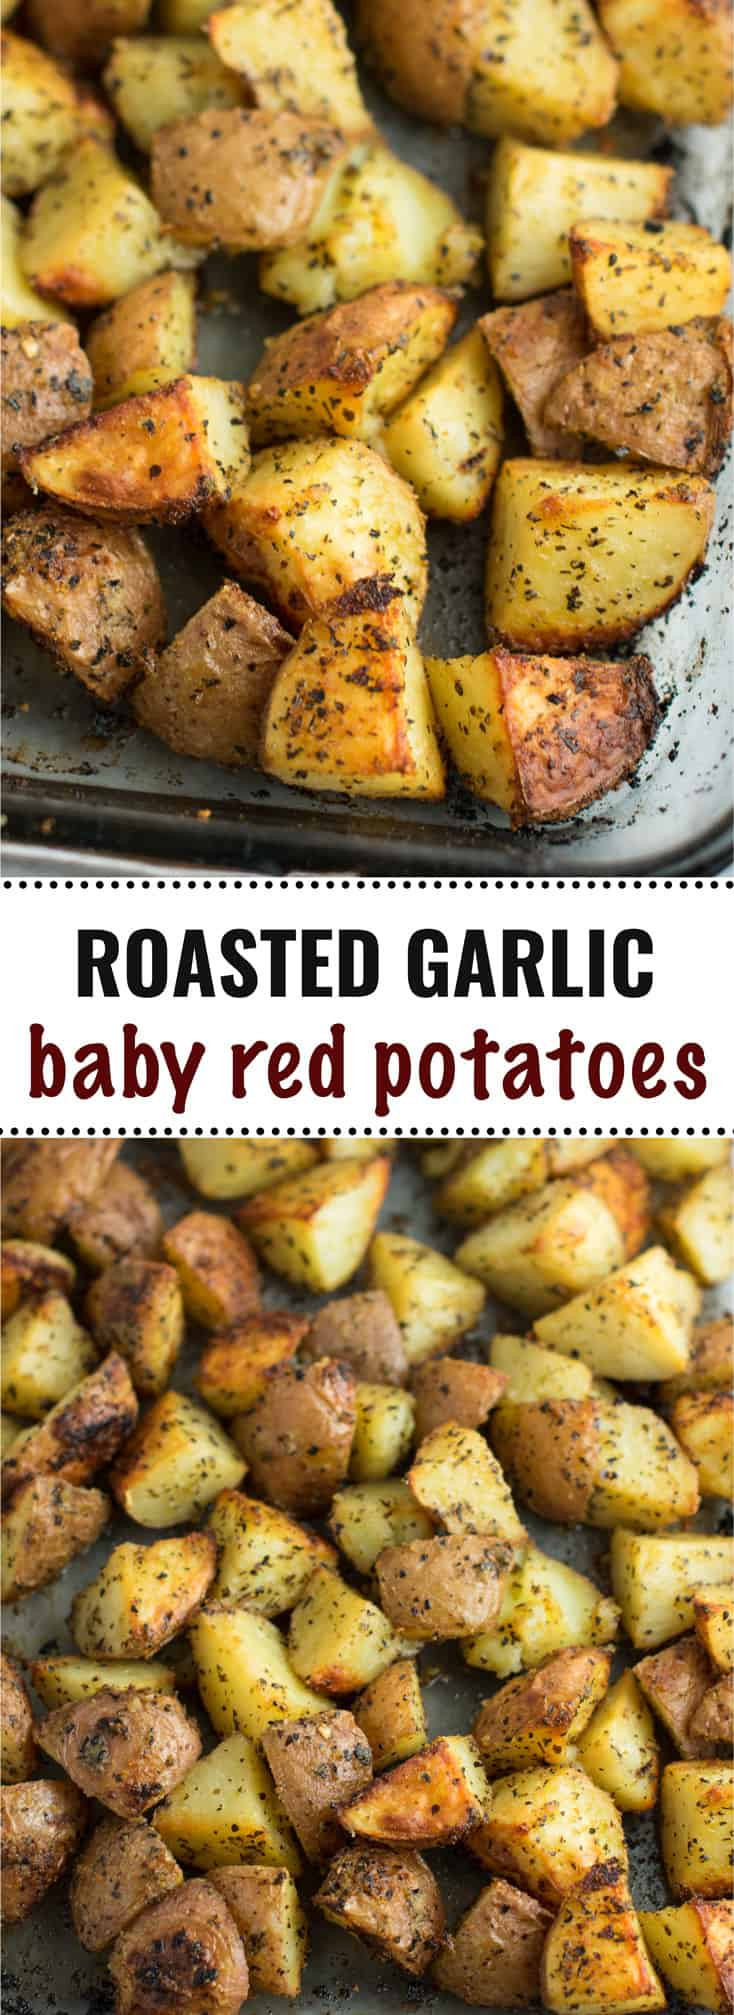 Baked Baby Red Potato Recipes
 Roasted Baby Red Potatoes Recipe Build Your Bite